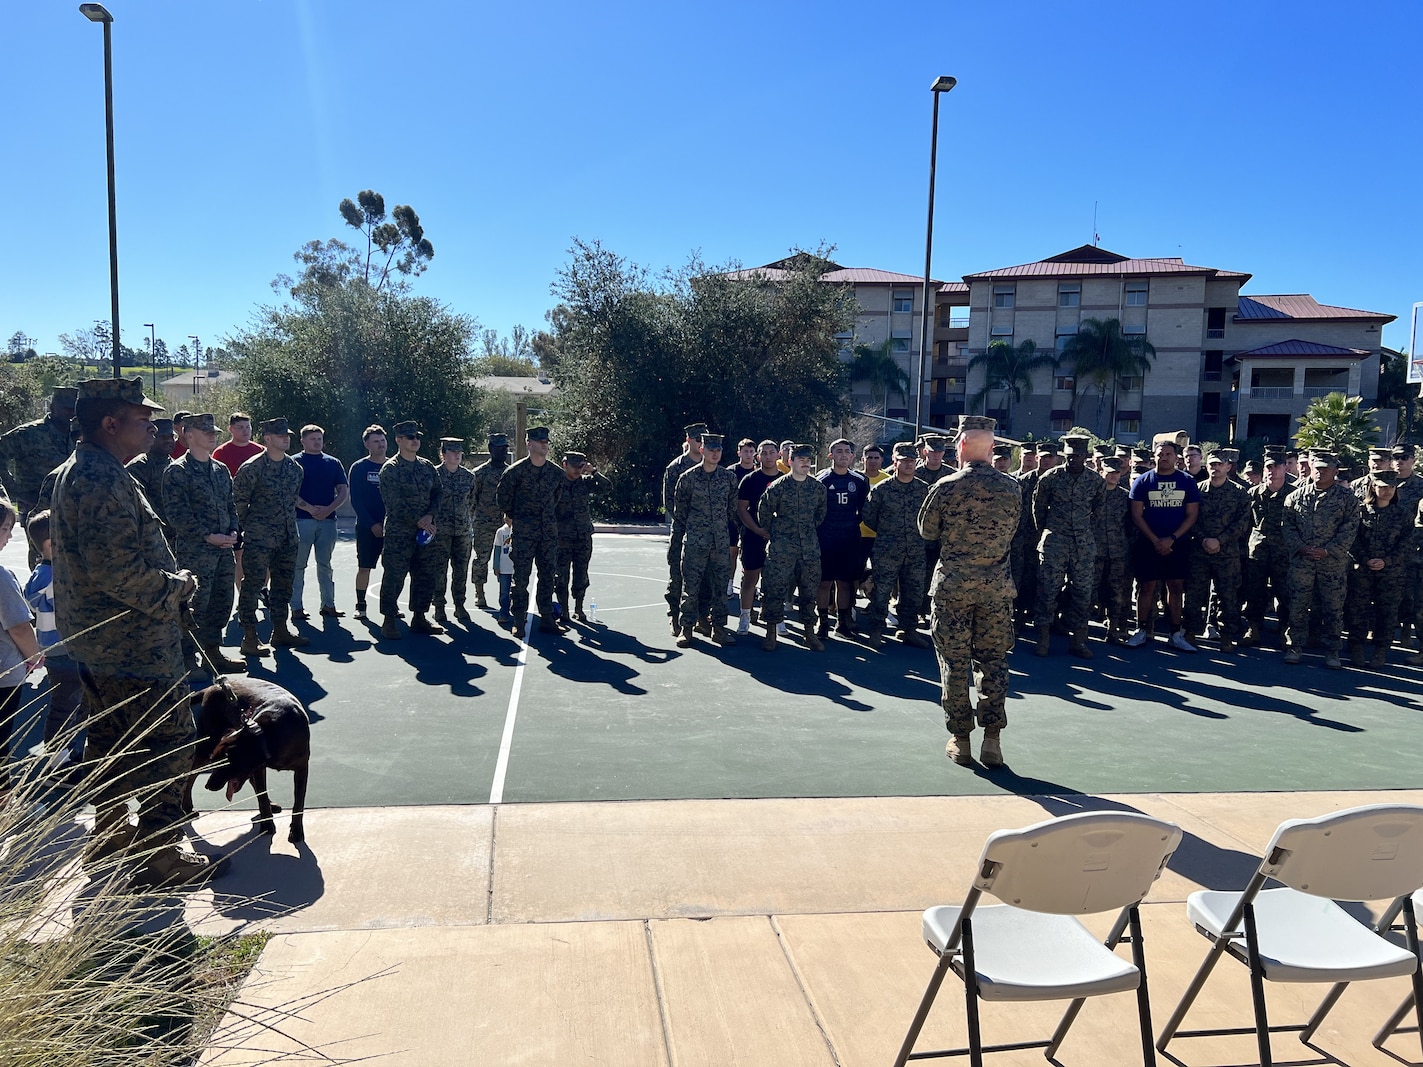 Combat Logistics Regiment 1 celebrated a “barracks bash” at their barracks to increase morale and esprit de corps, while encouraging camaraderie amongst the Marines and families.